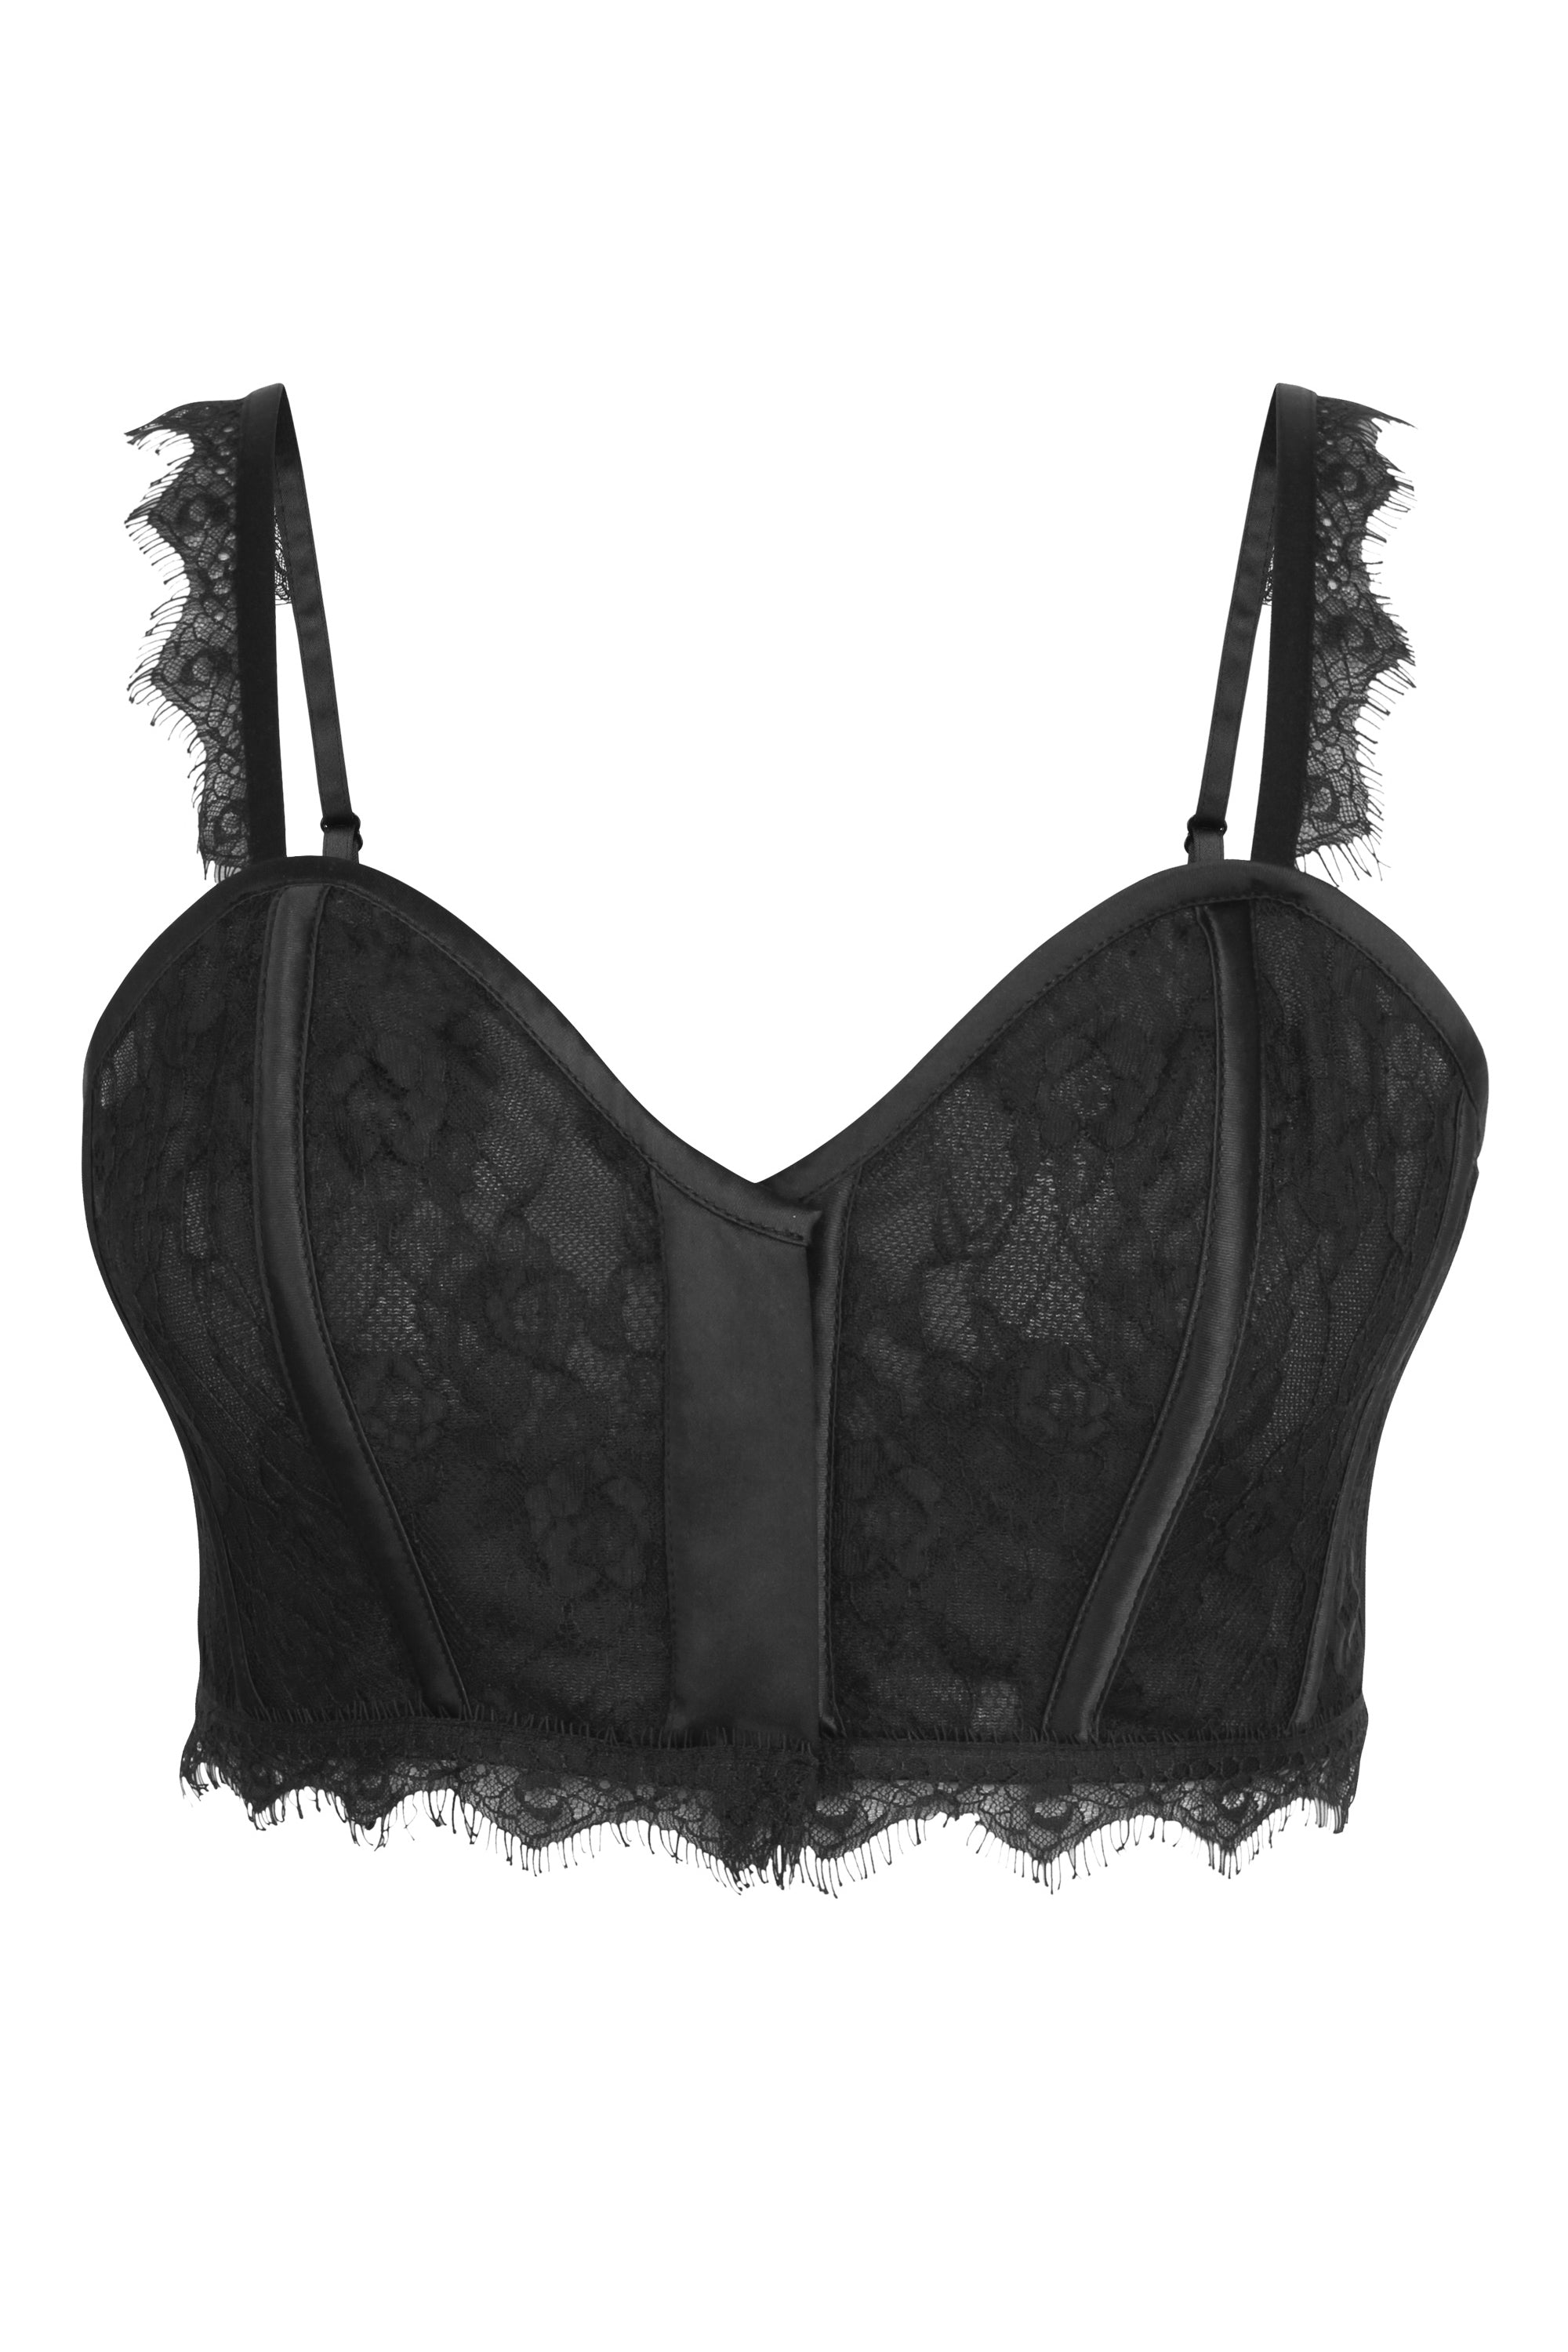 Marjorie Black Satin and Lace Corseted Bralette